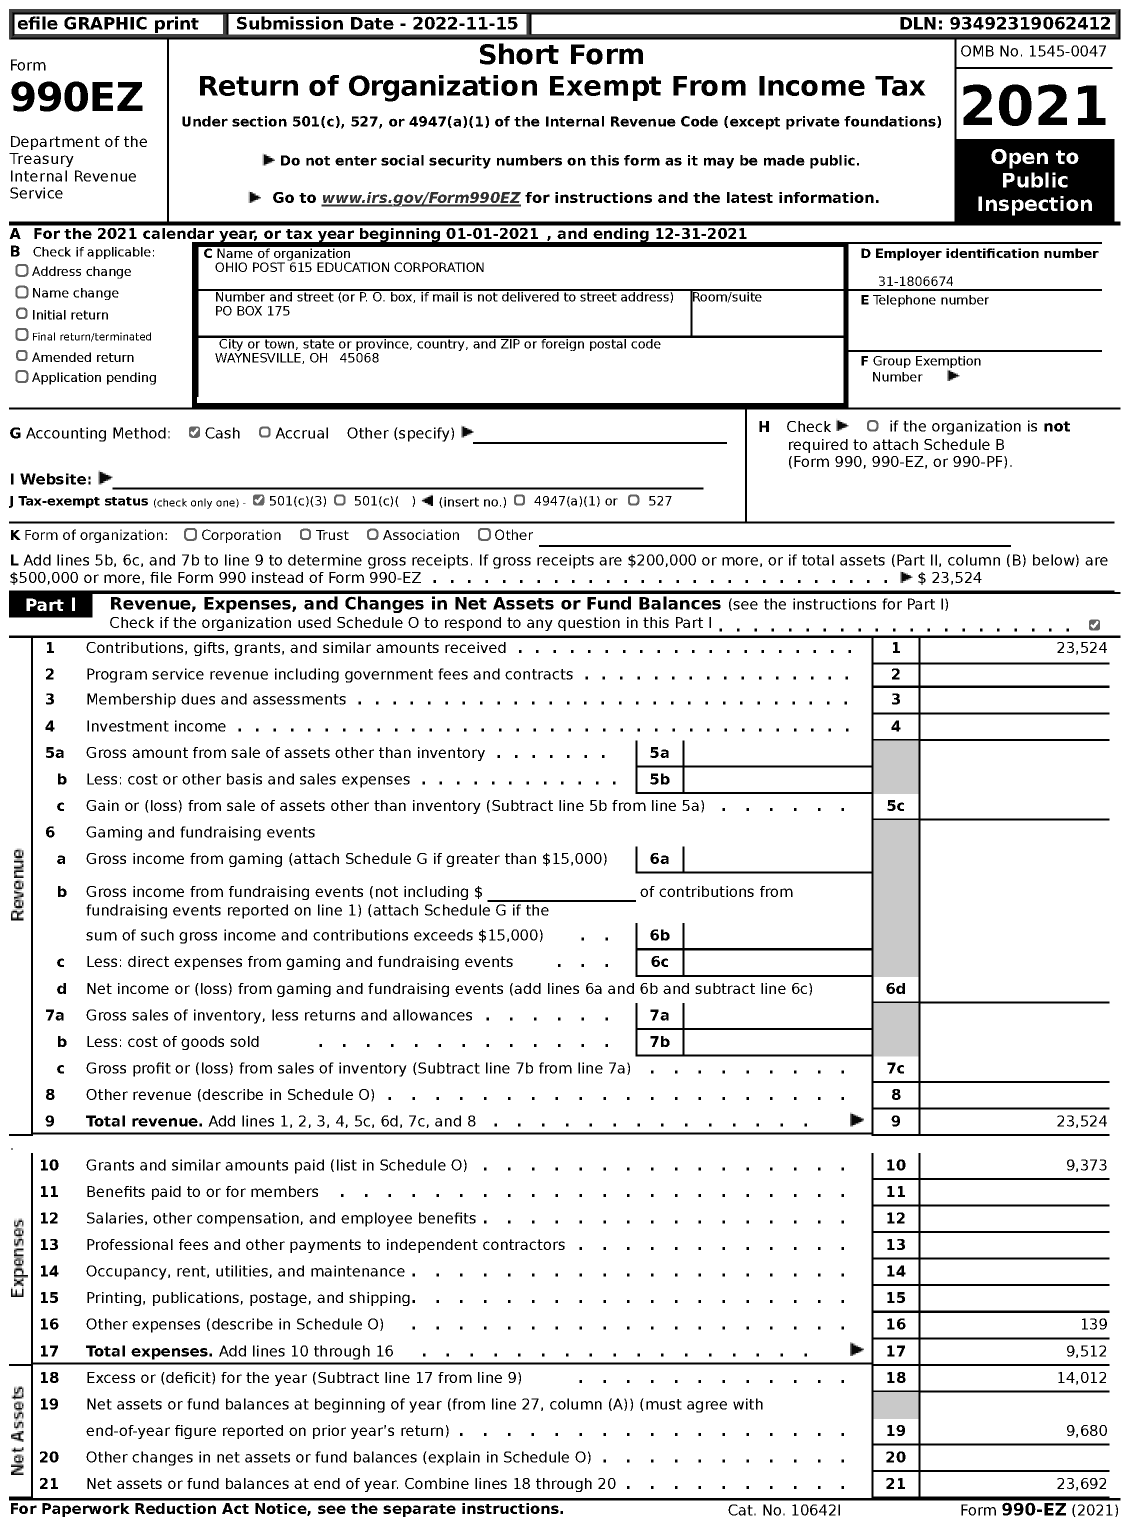 Image of first page of 2021 Form 990EZ for Ohio Post 615 Education Corporation